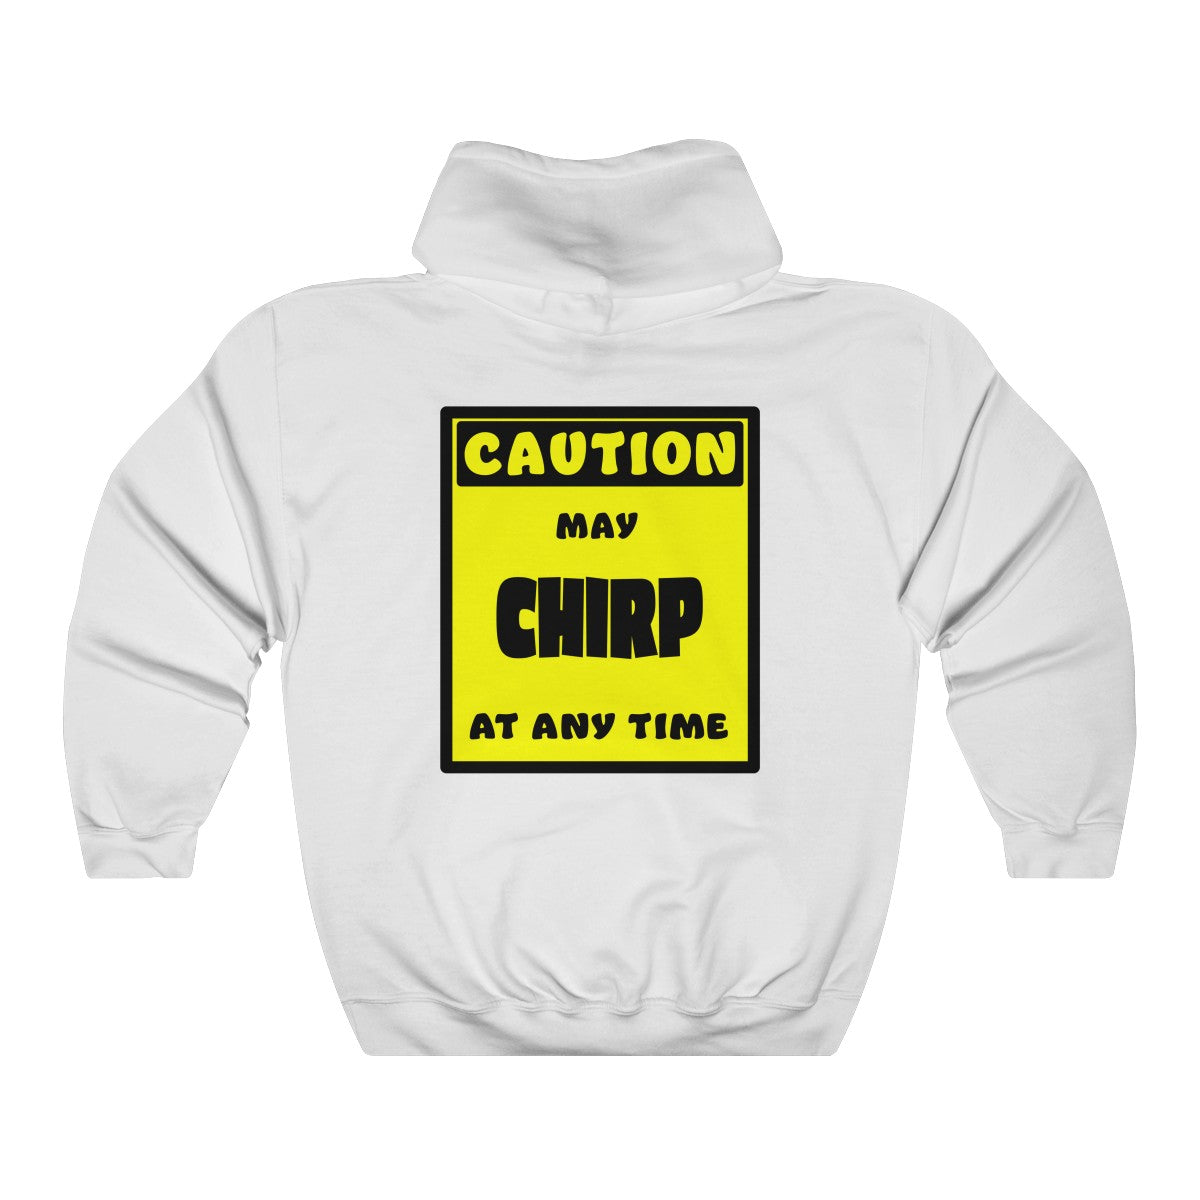 CAUTION! May CHIRP at any time! - Hoodie Hoodie AFLT-Whootorca White S 